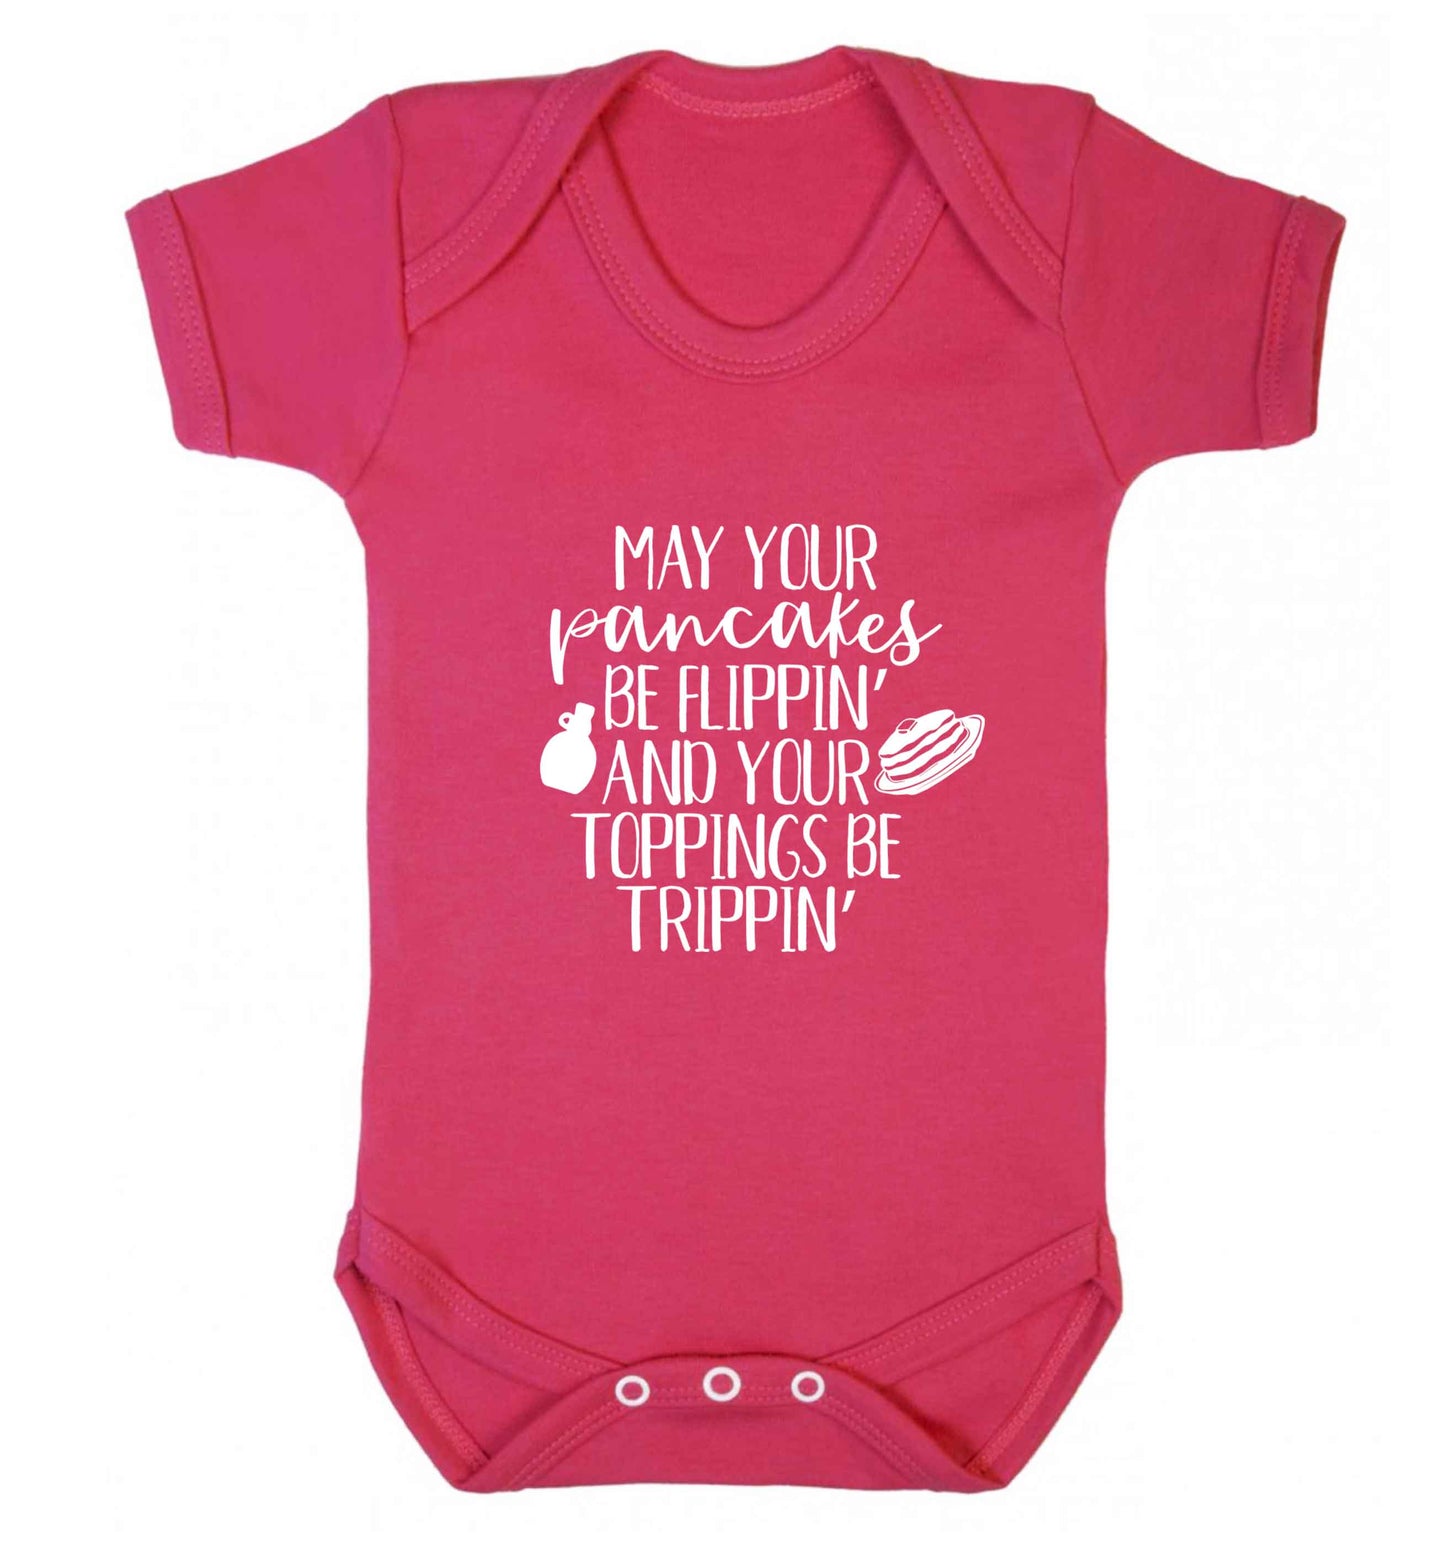 May your pancakes be flippin' and your toppings be trippin' baby vest dark pink 18-24 months